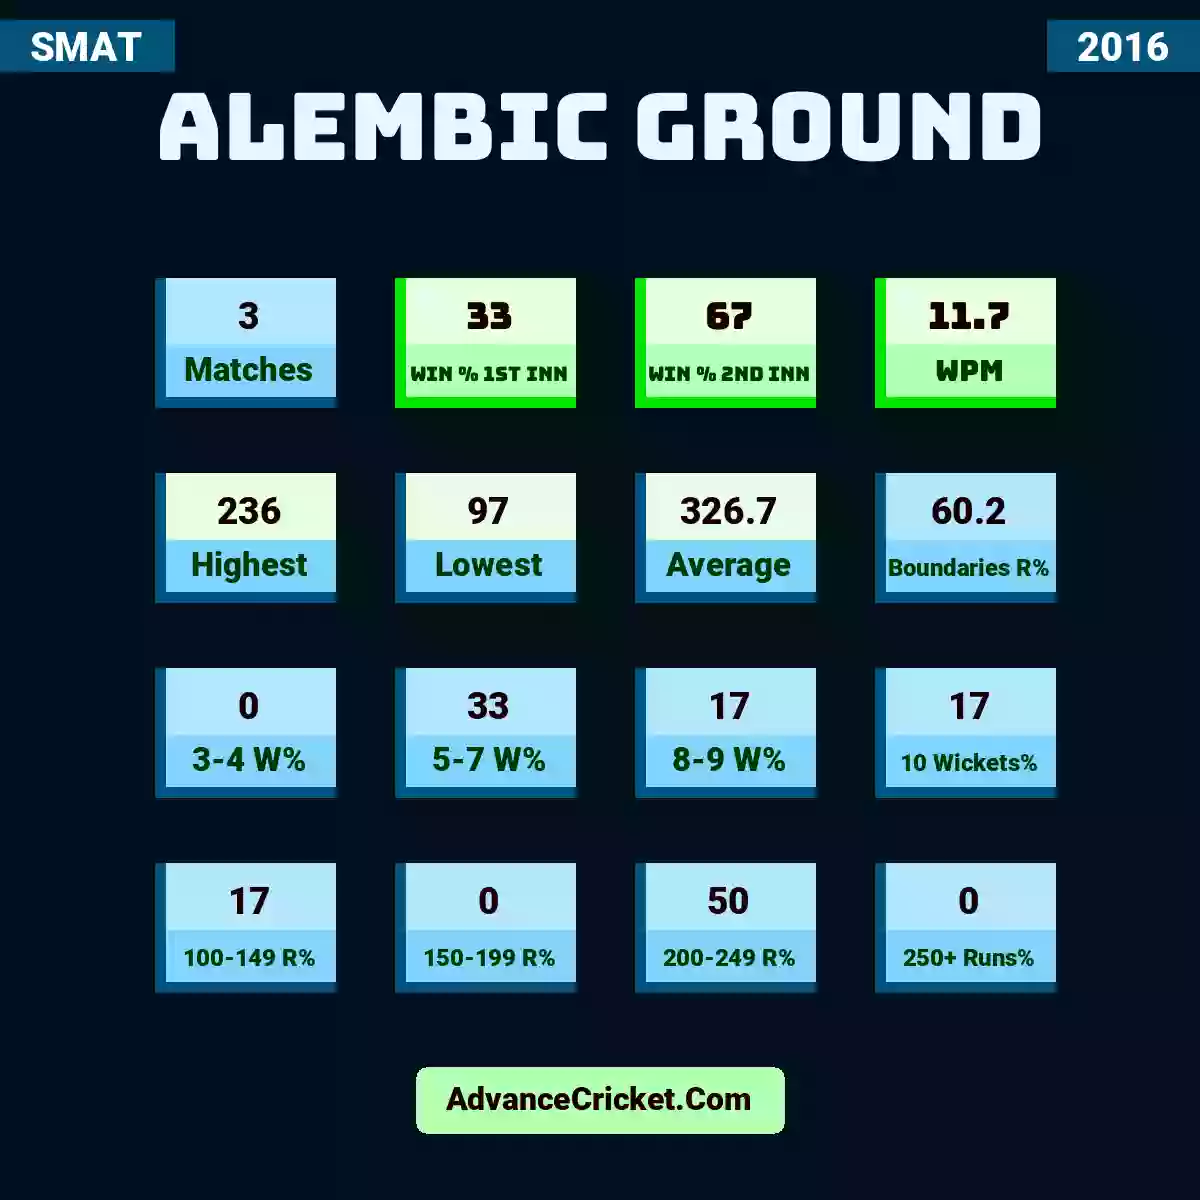 Image showing Alembic Ground with Matches: 3, Win % 1st Inn: 33, Win % 2nd Inn: 67, WPM: 11.7, Highest: 236, Lowest: 97, Average: 326.7, Boundaries R%: 60.2, 3-4 W%: 0, 5-7 W%: 33, 8-9 W%: 17, 10 Wickets%: 17, 100-149 R%: 17, 150-199 R%: 0, 200-249 R%: 50, 250+ Runs%: 0.